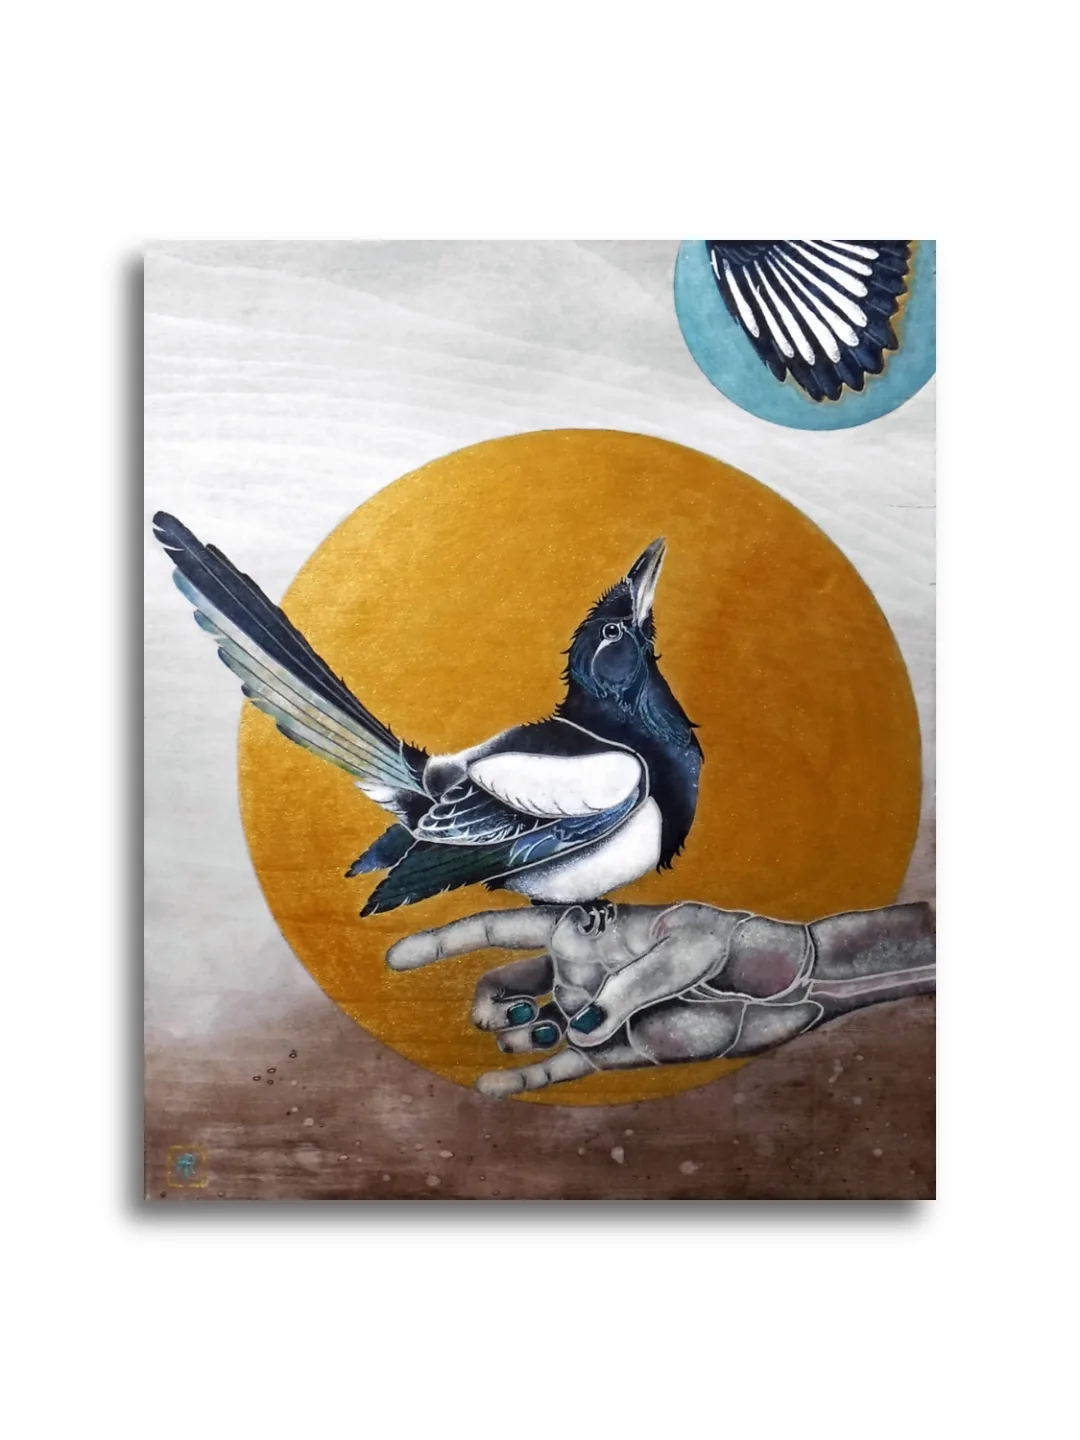 Magpie by Ann Richmond - A stunning, Original stencilled artwork featuring a Magpie. Painted in the artist's unique style... Framing available.